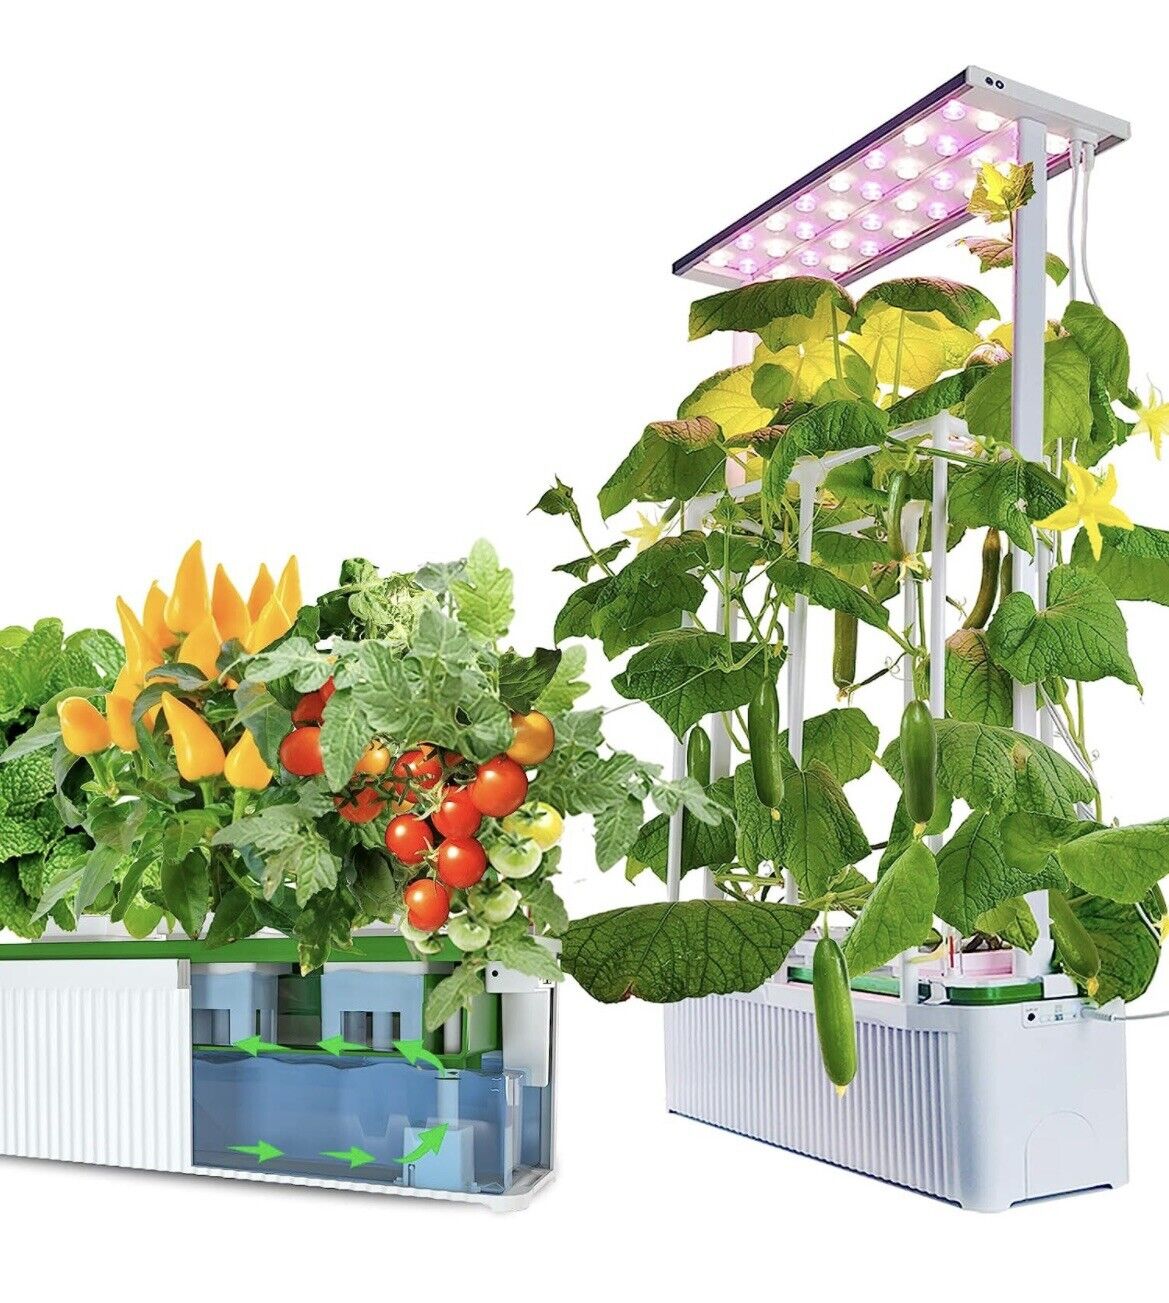 BRAND NEW Smart Hydroponic Growing System With Light Kit